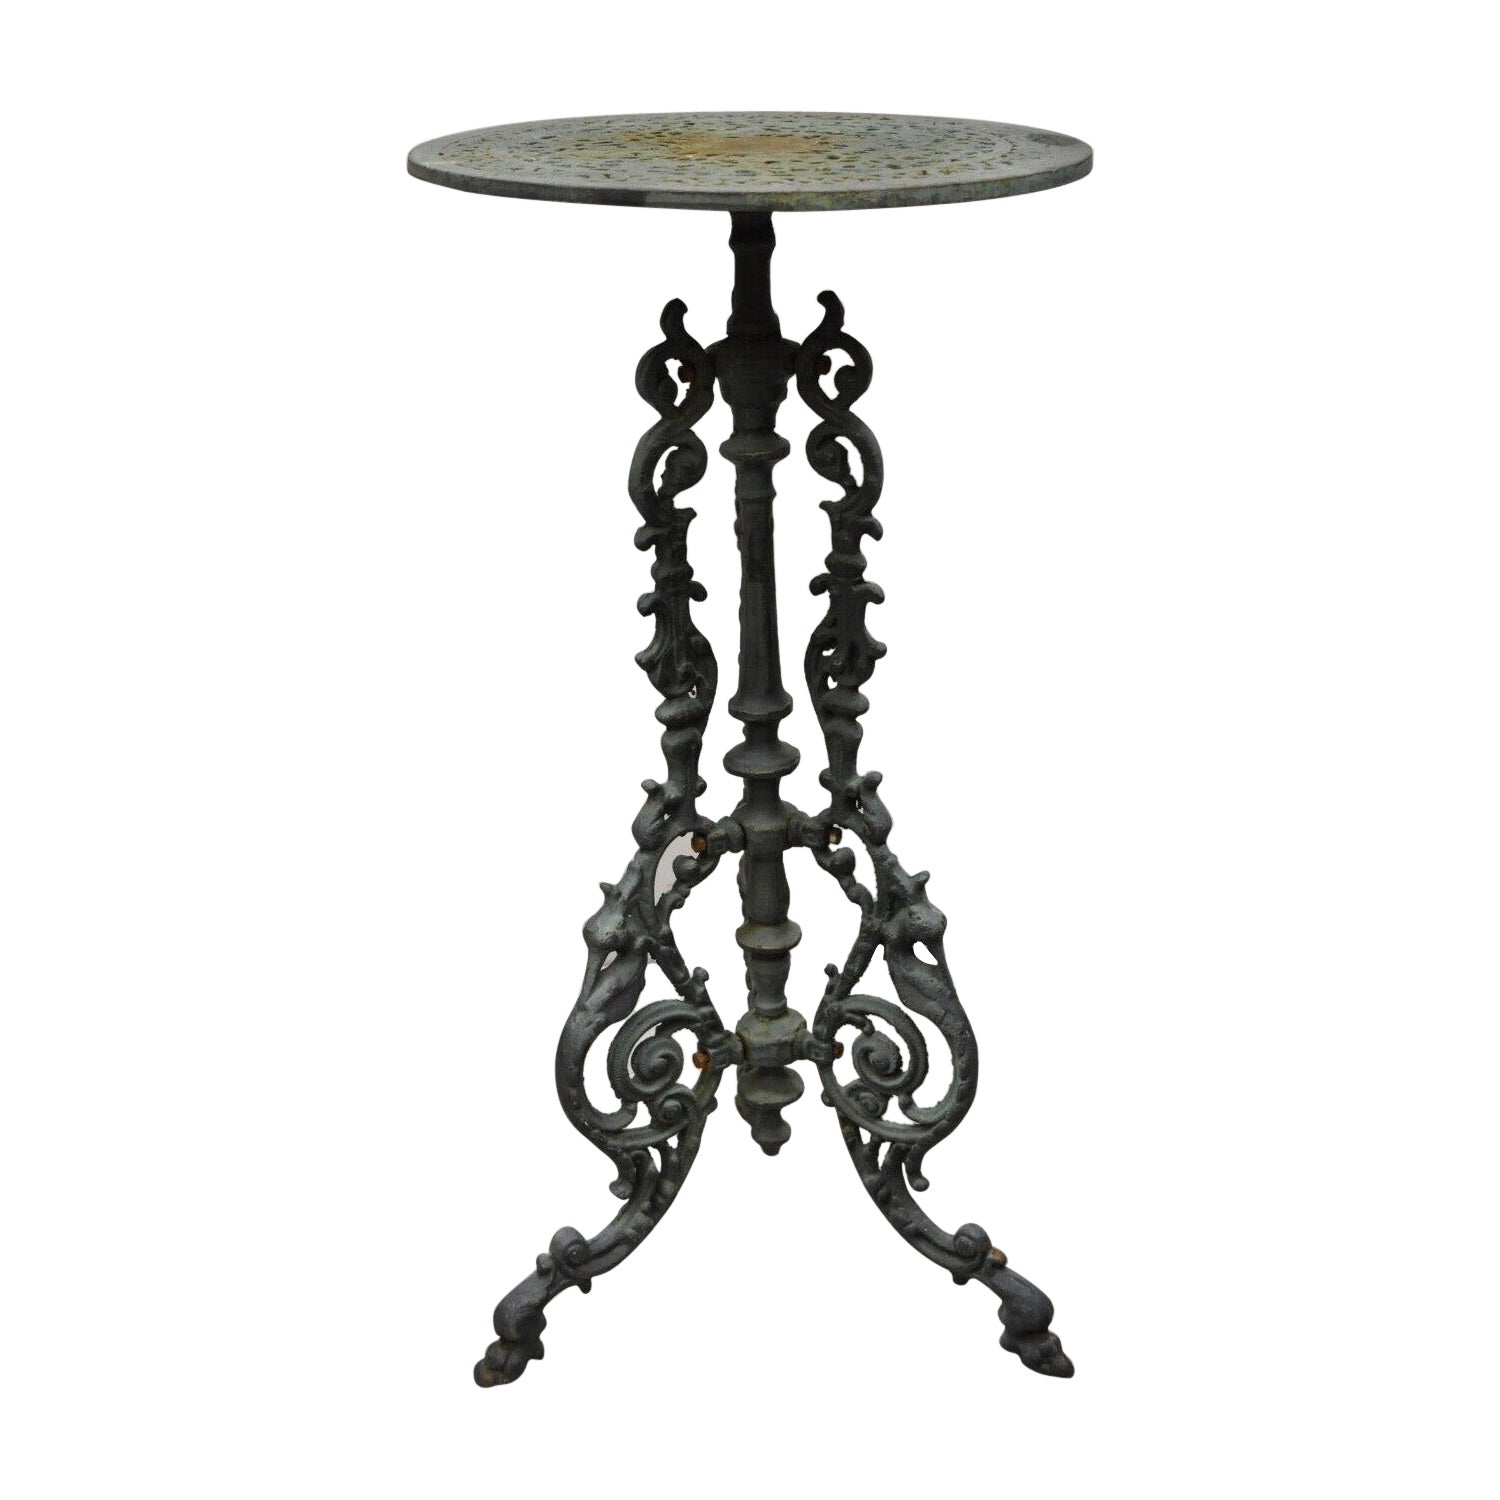 Antique Victorian Cast Iron Green Ornate Plant Stand Tripod Pedestal Table For Sale